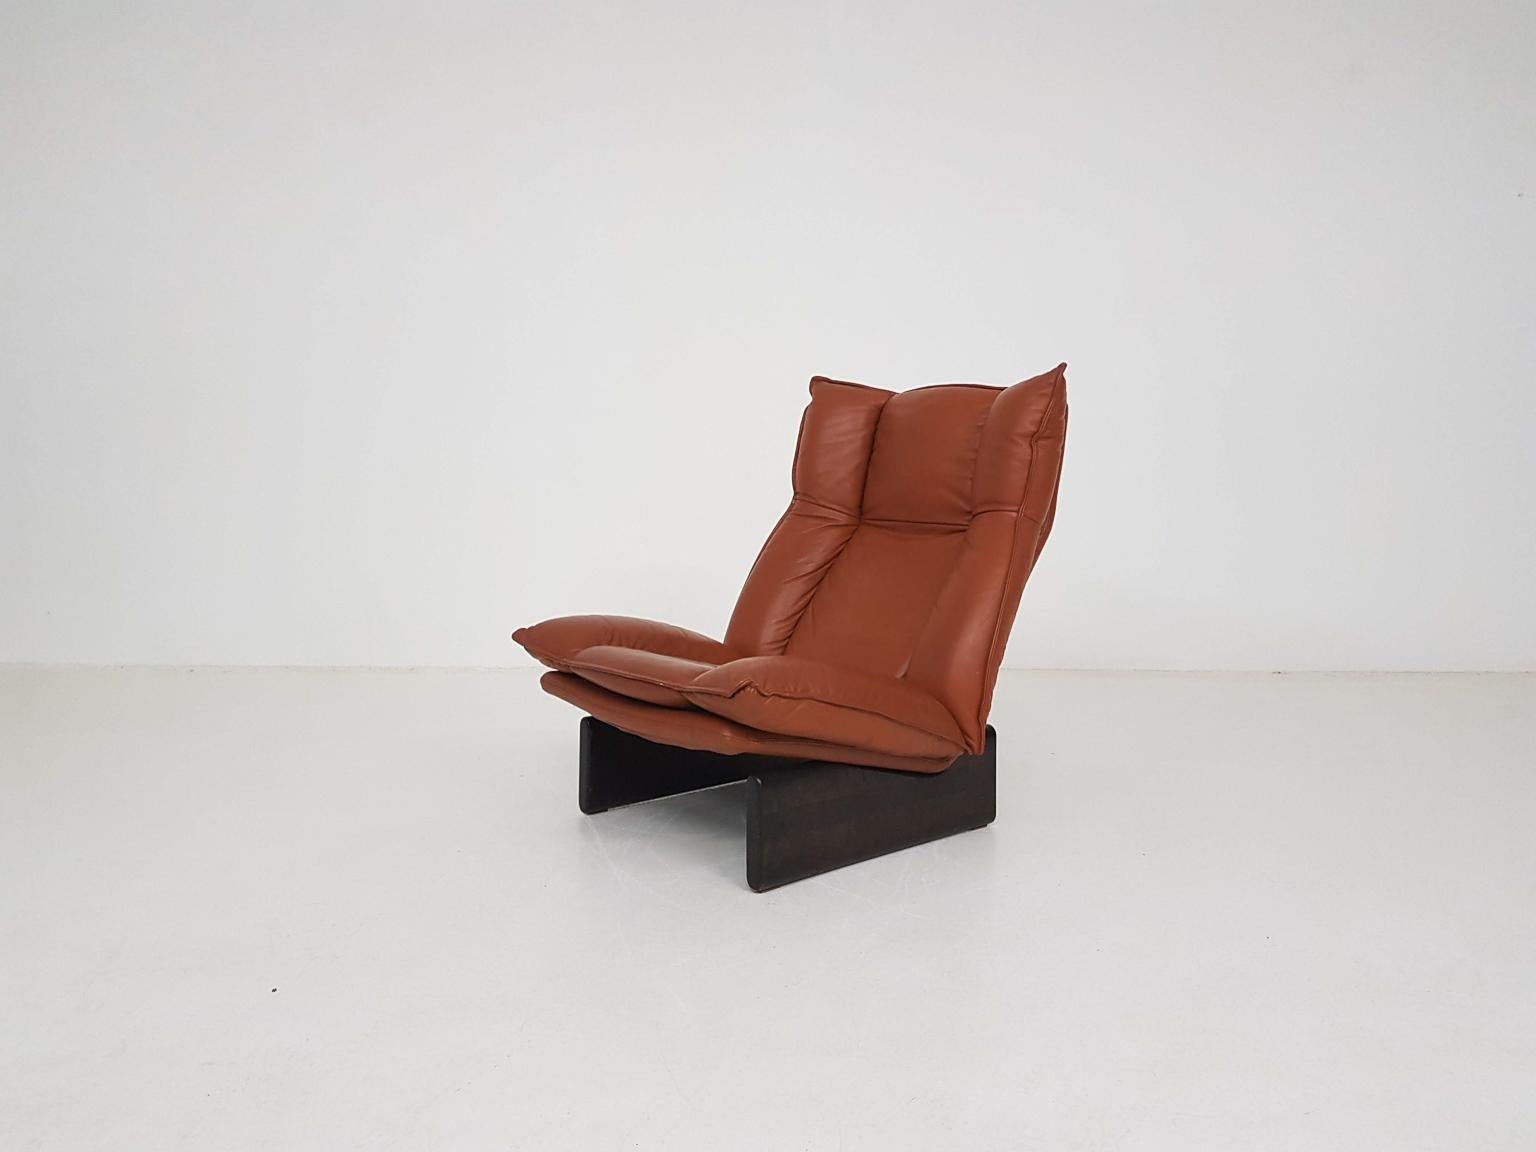 Lounge chair made in leather on a wooden base by Dutch high end furniture manufactorer Leolux from the 1970s.

We think this lounge chair has a very distinctive design for its period. The seating and back are made of one piece, upholstered with